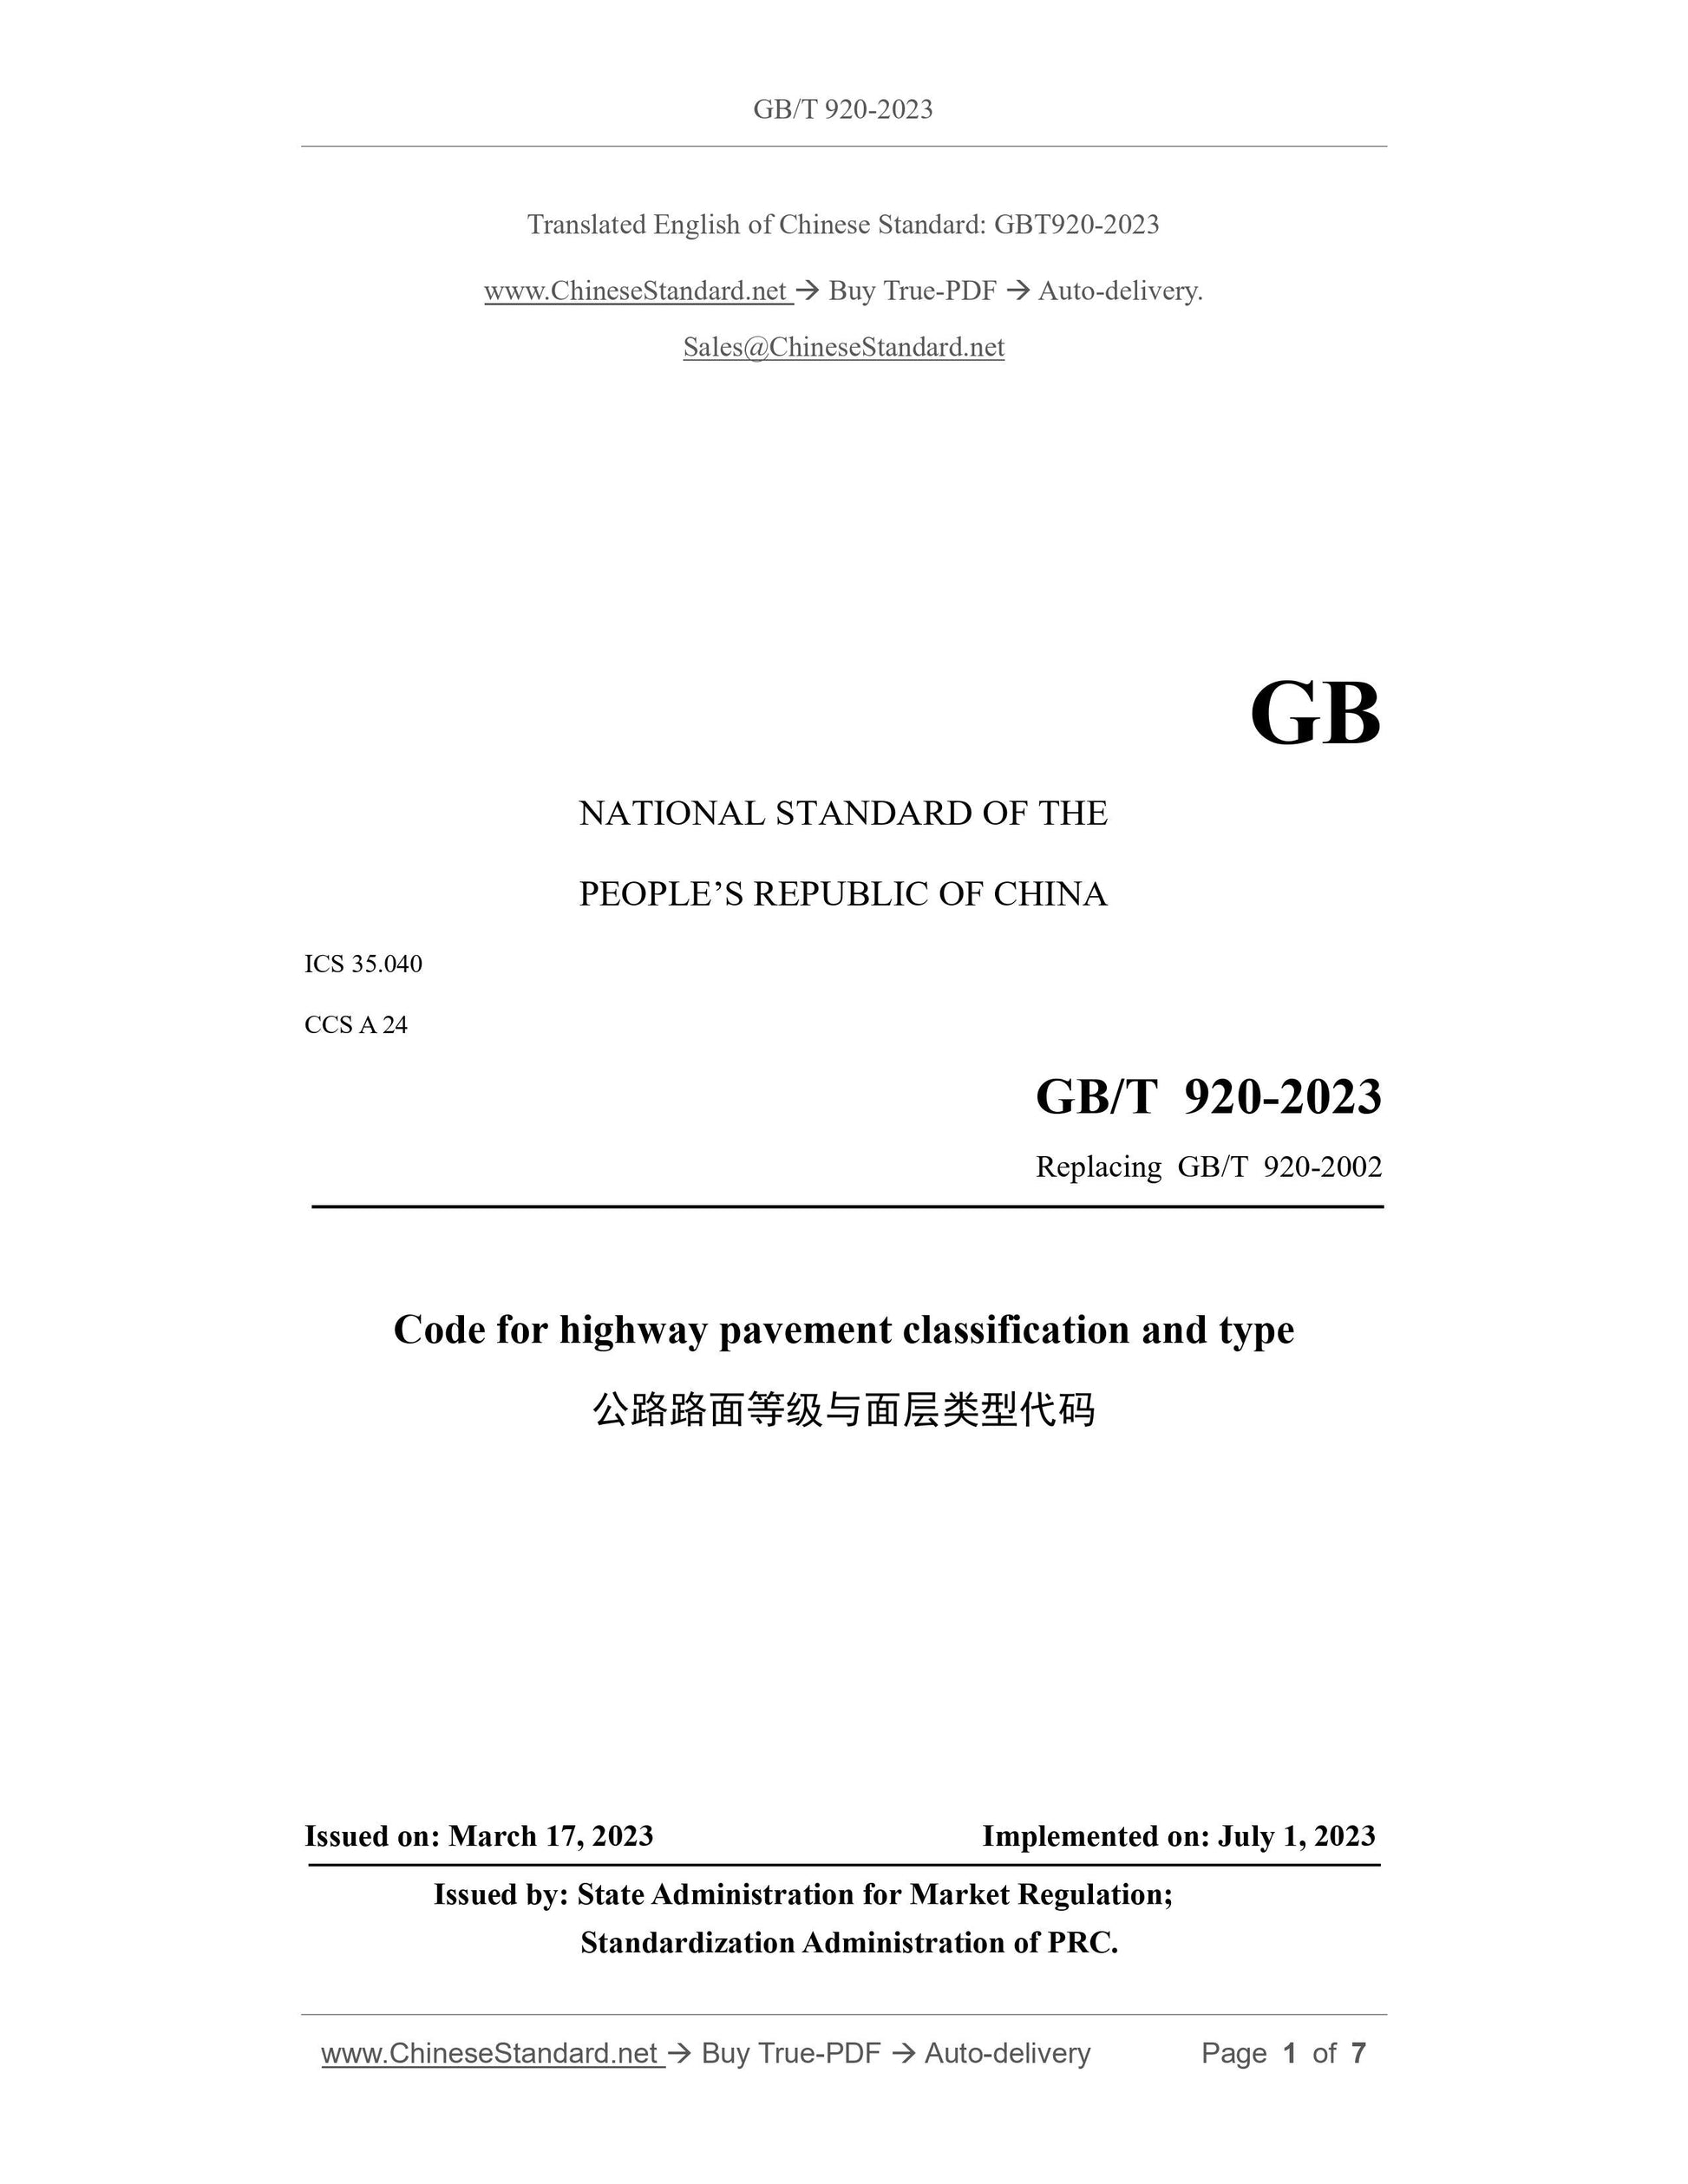 GB/T 920-2023 Page 1